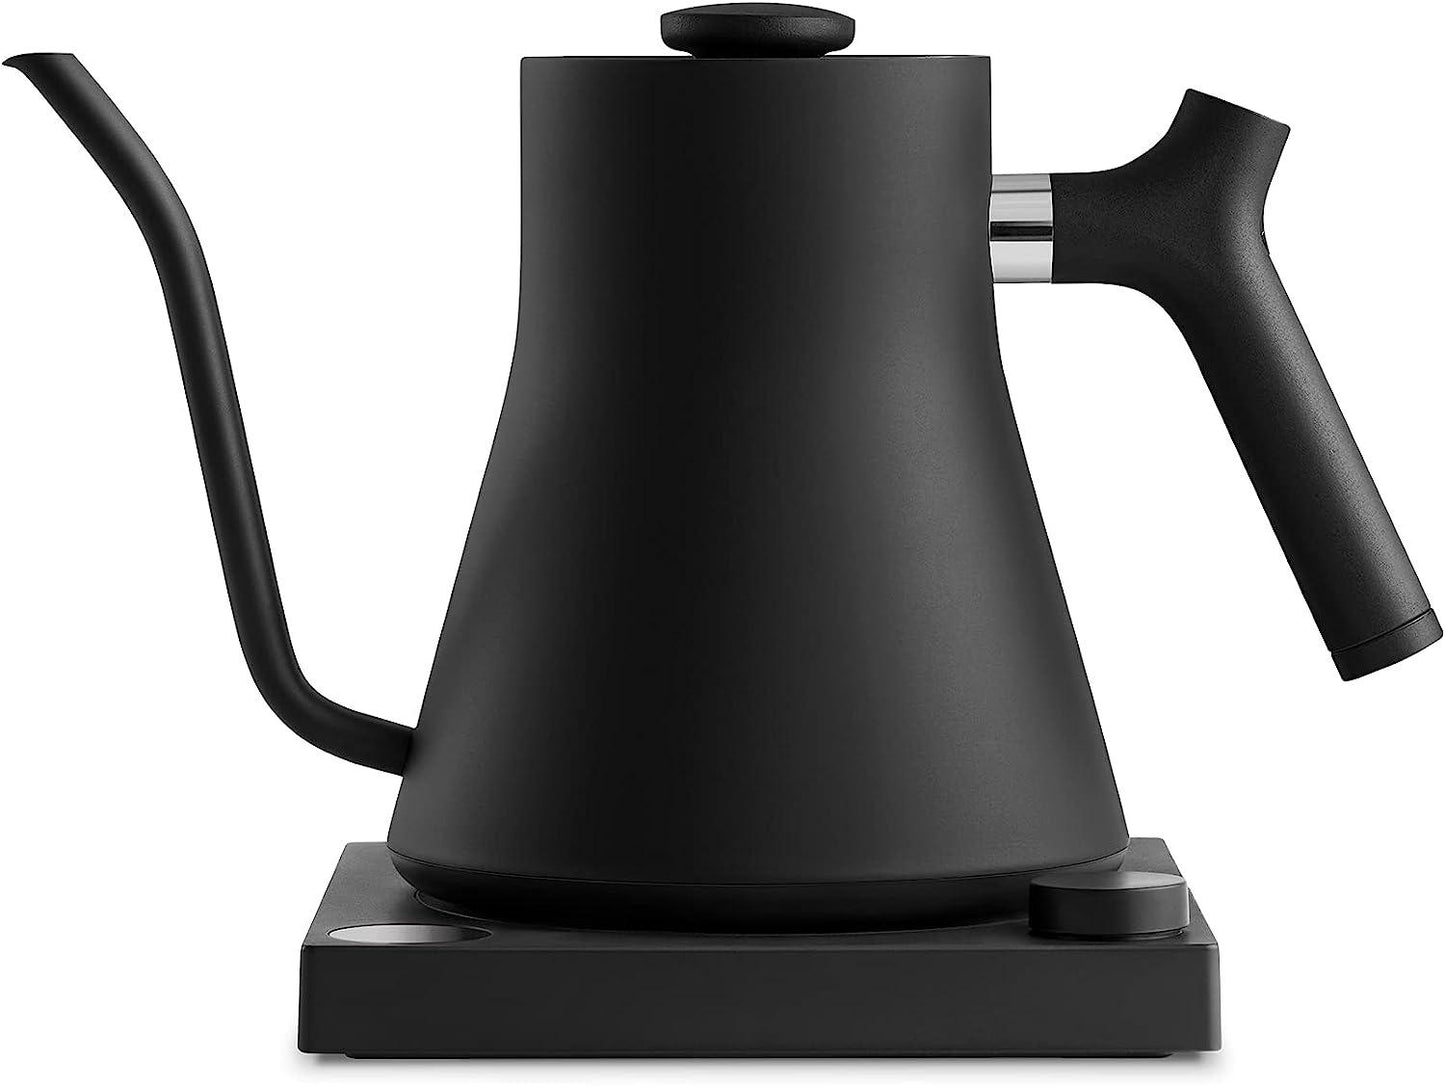 Fellow Stagg EKG Electric Gooseneck Kettle - Pour-Over Coffee and Tea Kettle - Stainless Steel Kettle Water Boiler - Quick Heating Electric Kettles for Boiling Water